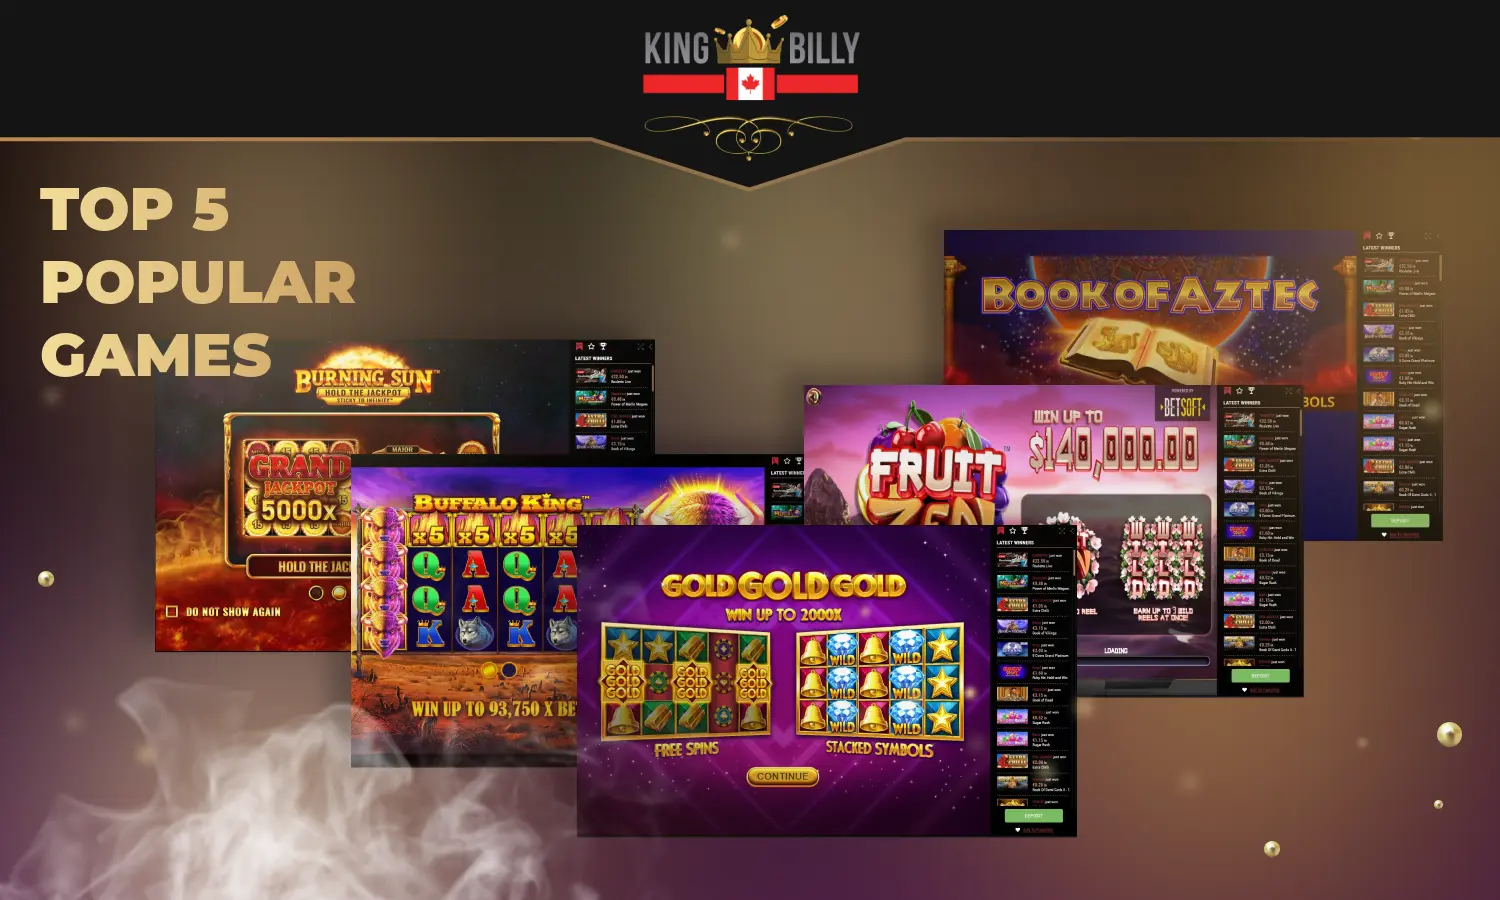 Canadian players will find the top 5 King Billy Casino slots in the “Popular” section